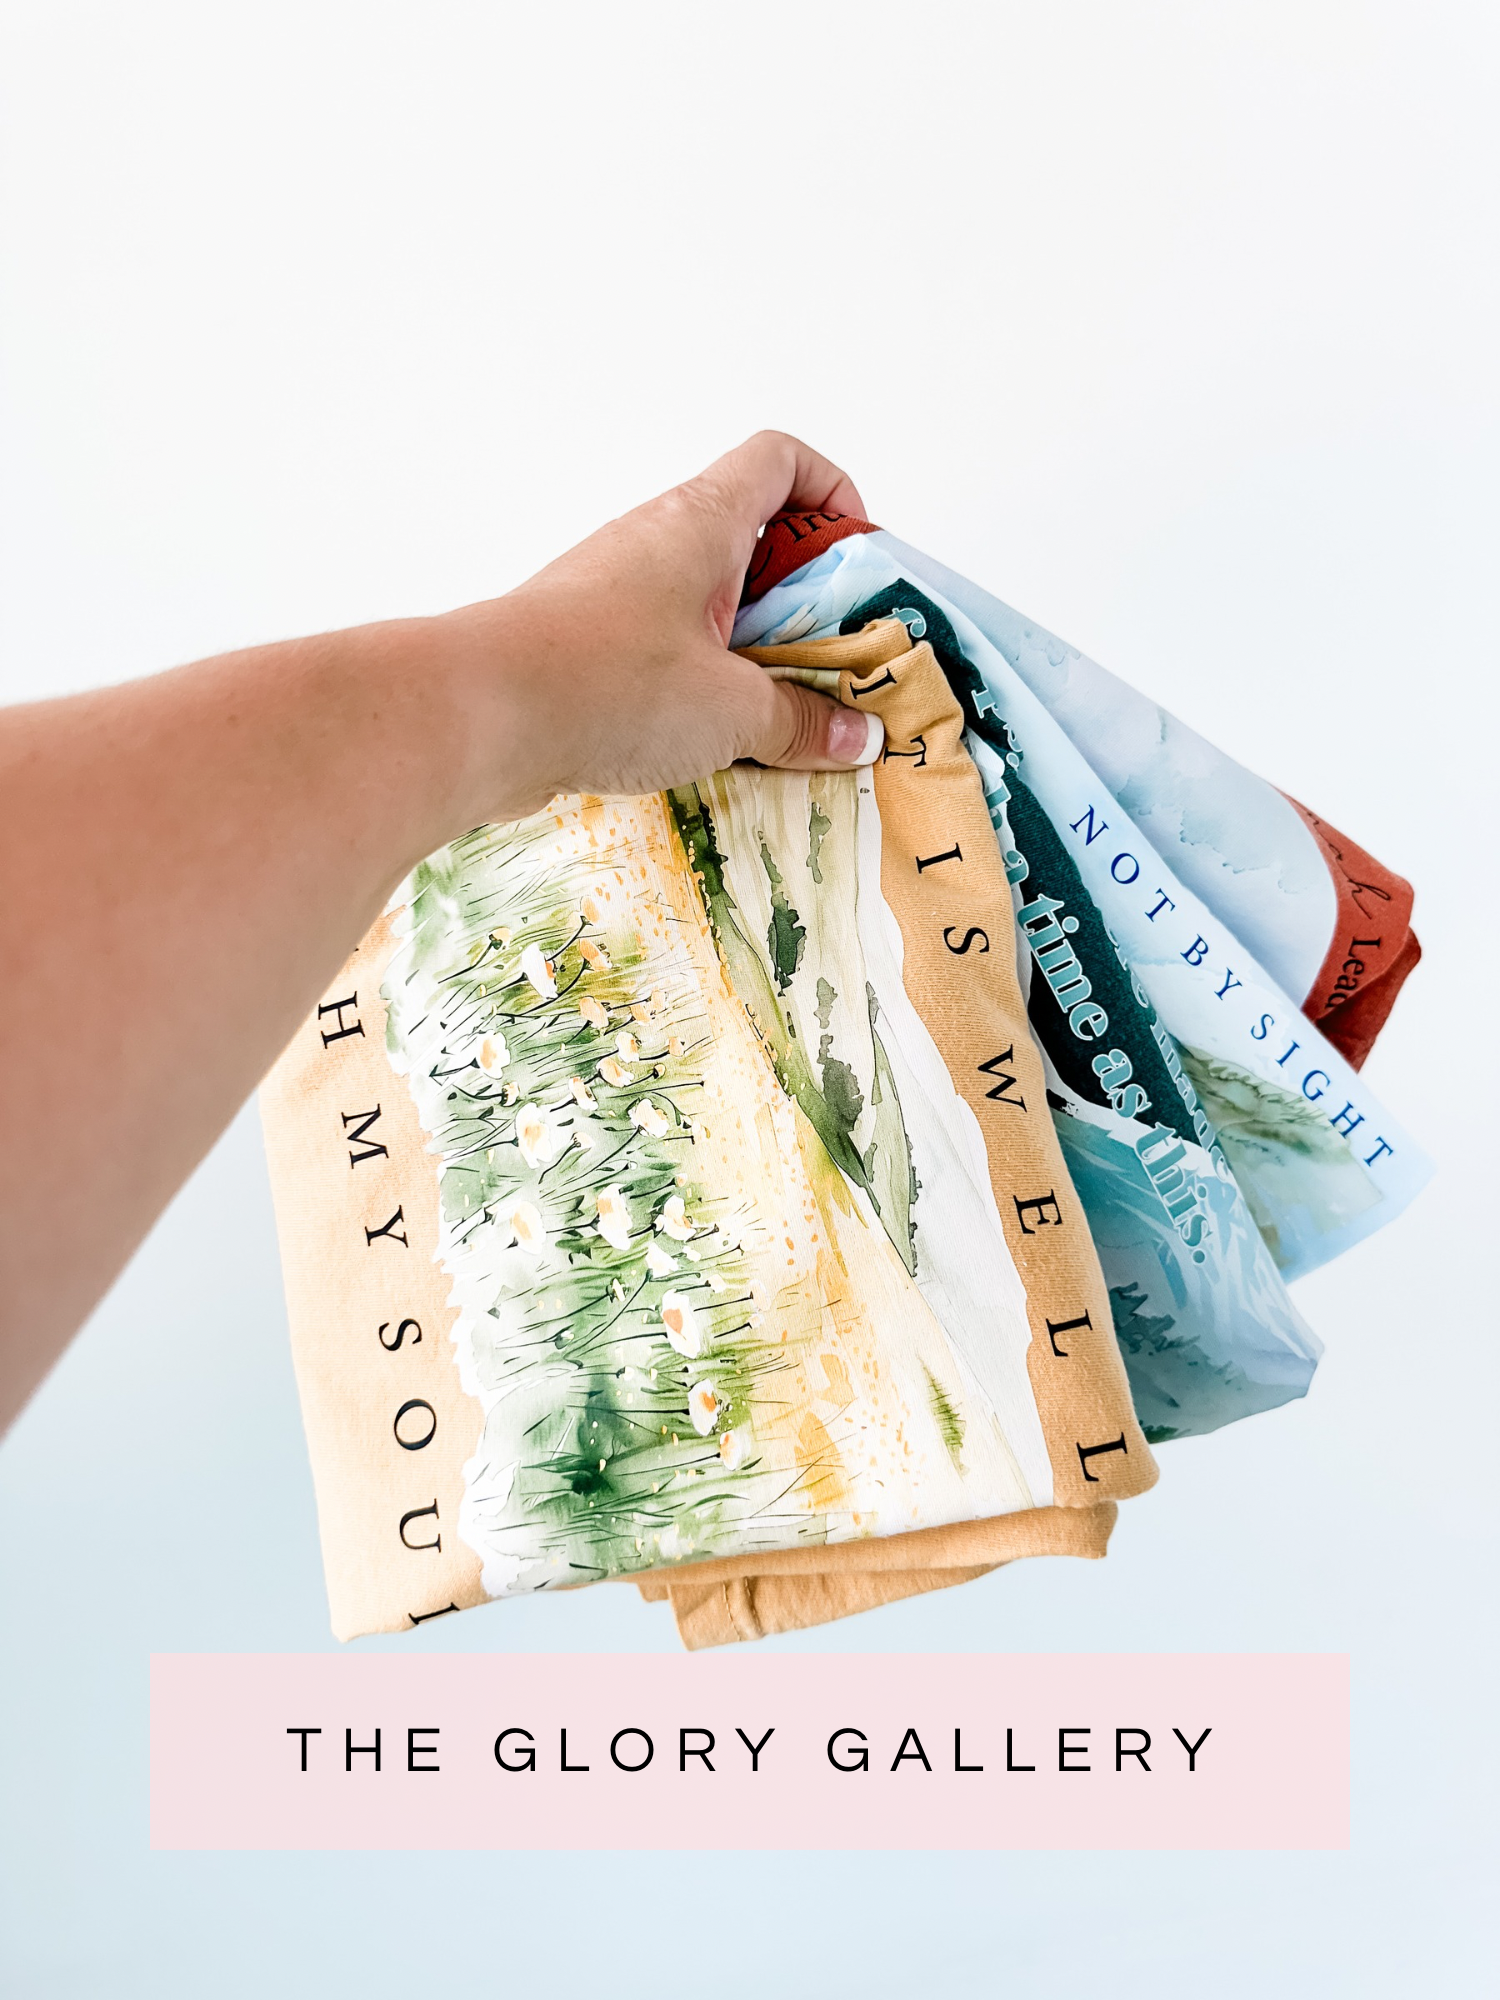 The Glory Gallery